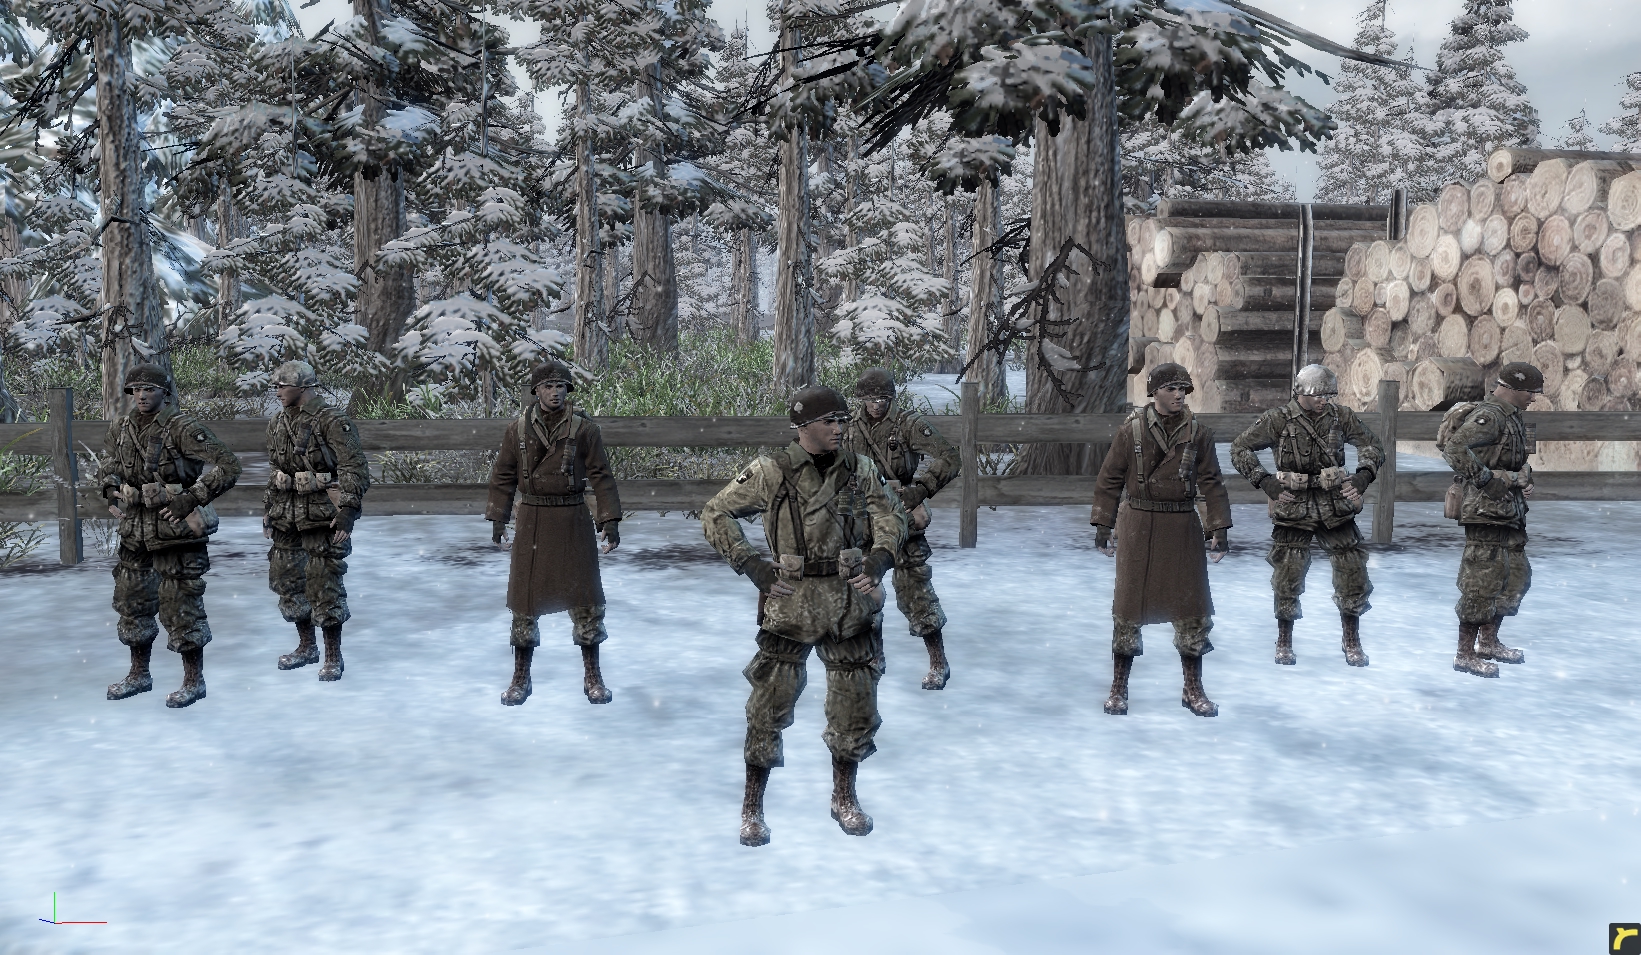 company of heroes europe at war cheat mode